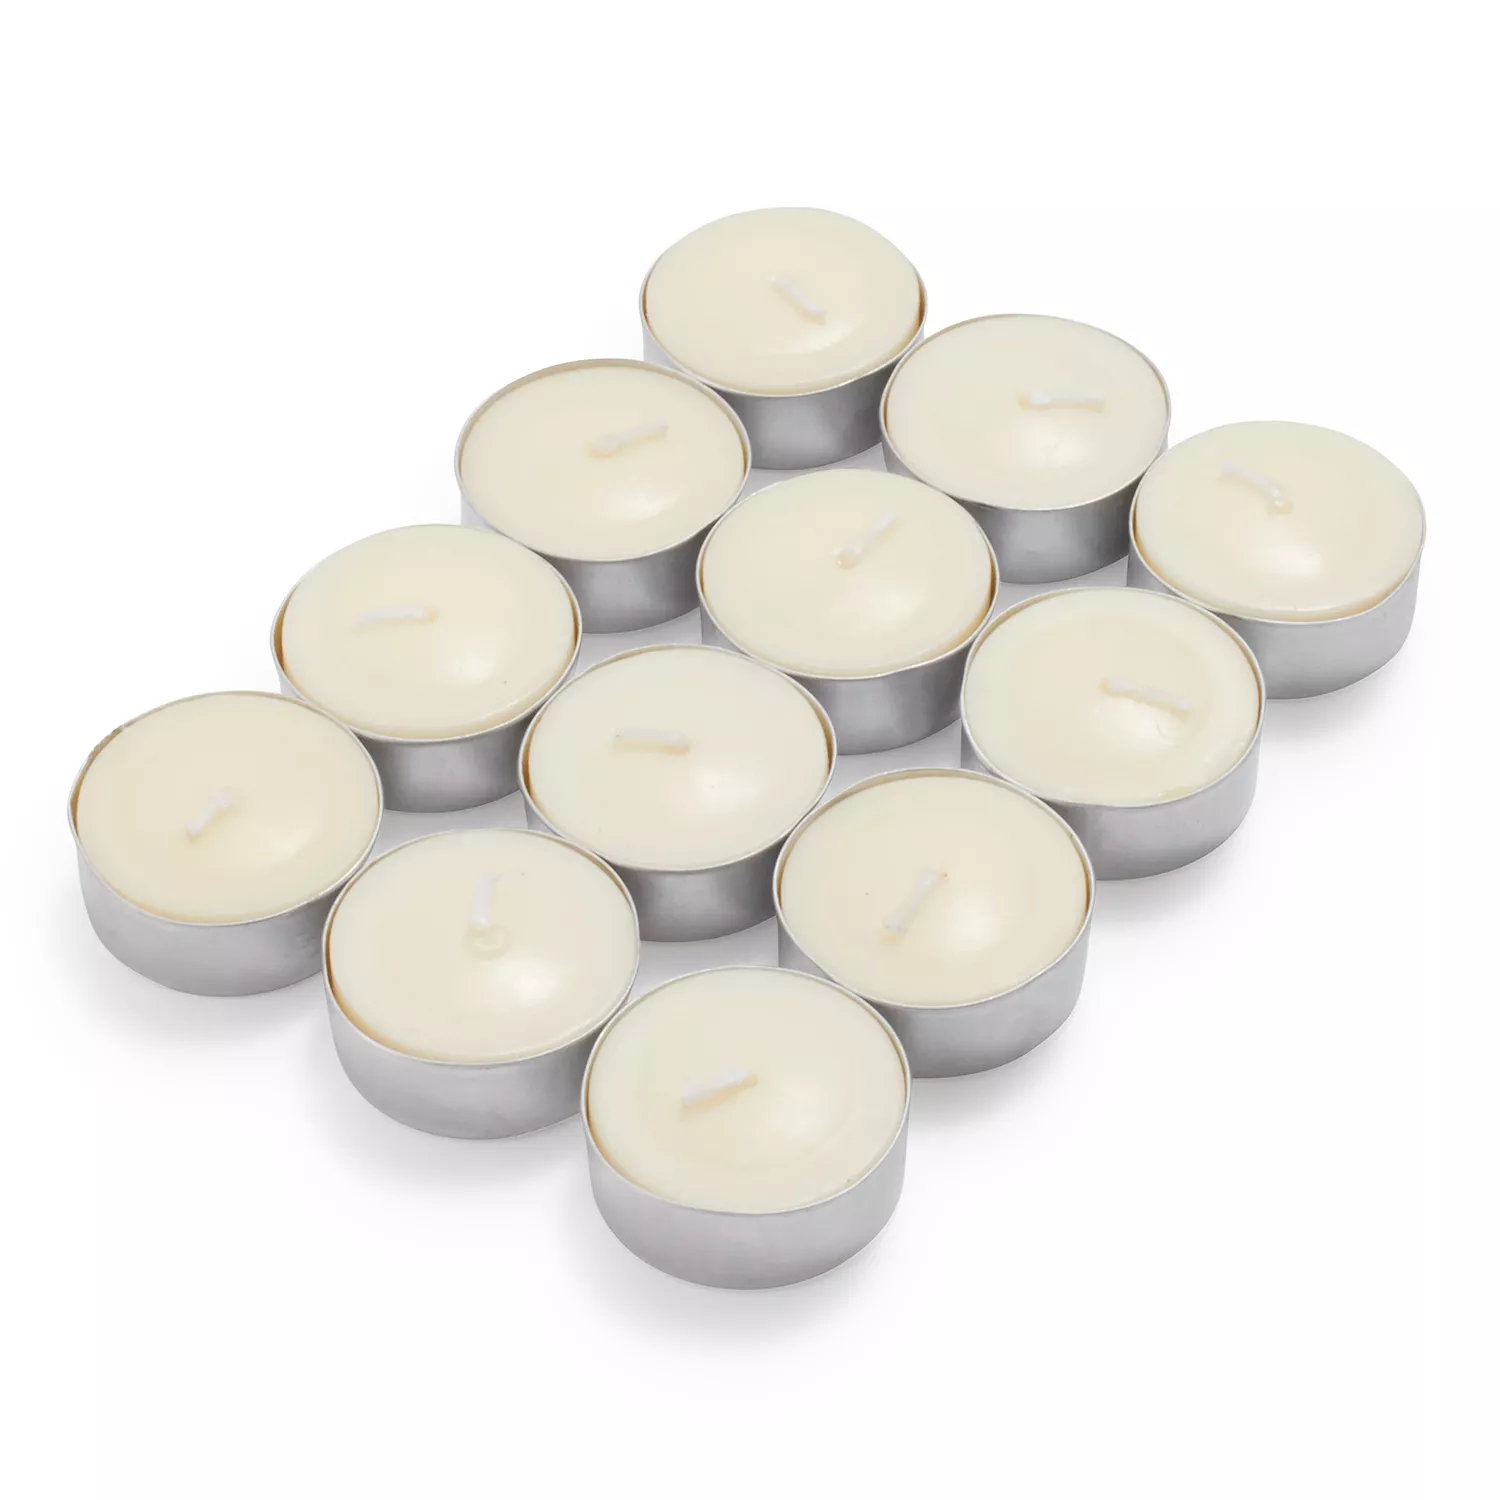 Ivory Tealight Candles, Set of 50